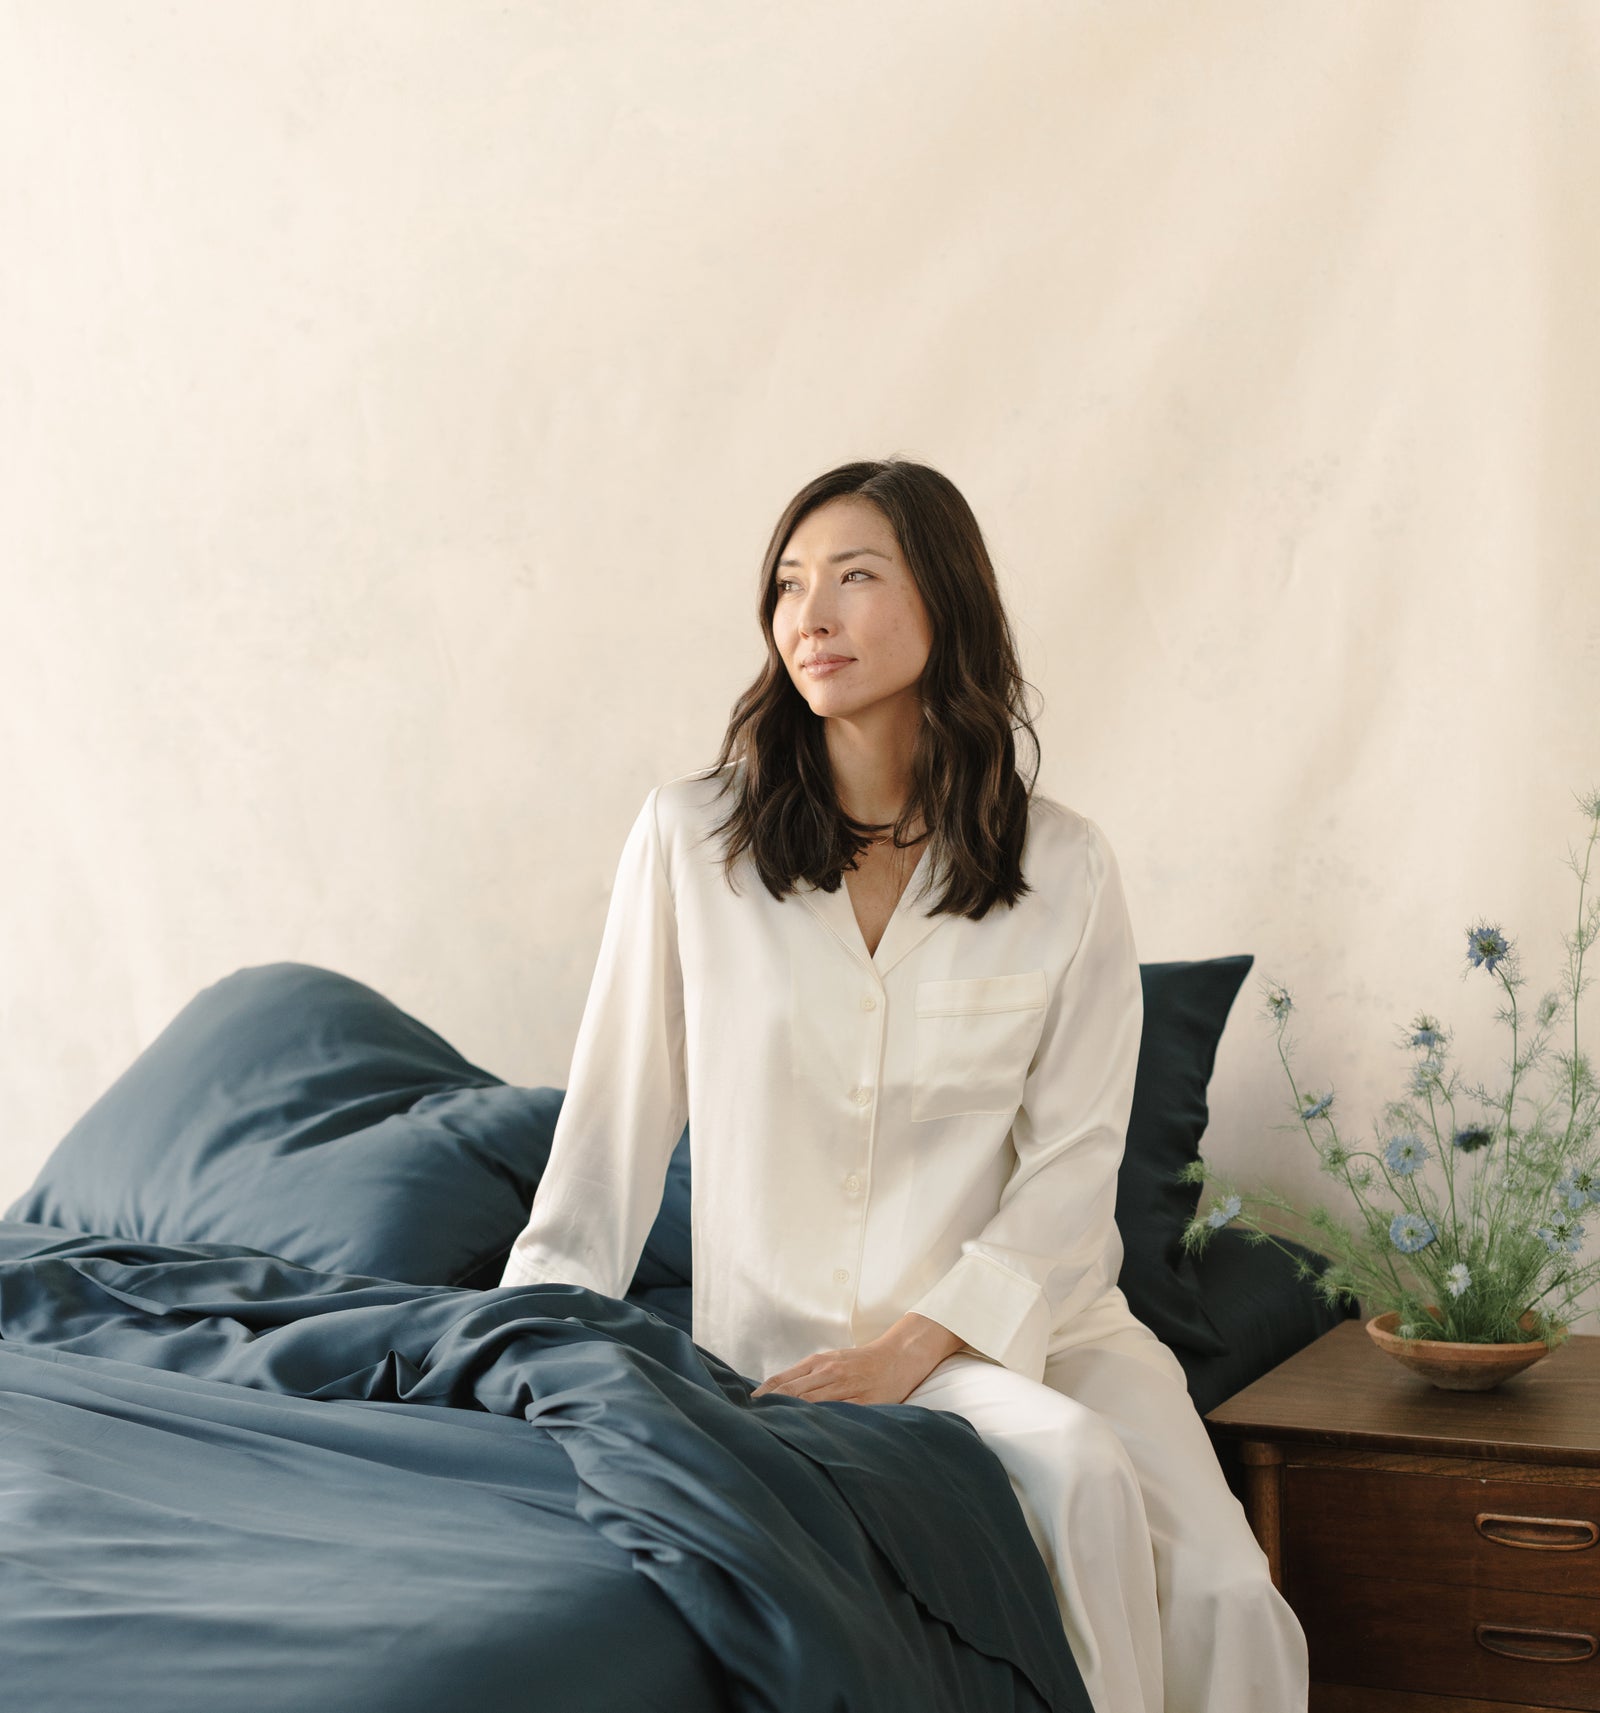 Woman in white pajamas sitting on bed with navy bedding 